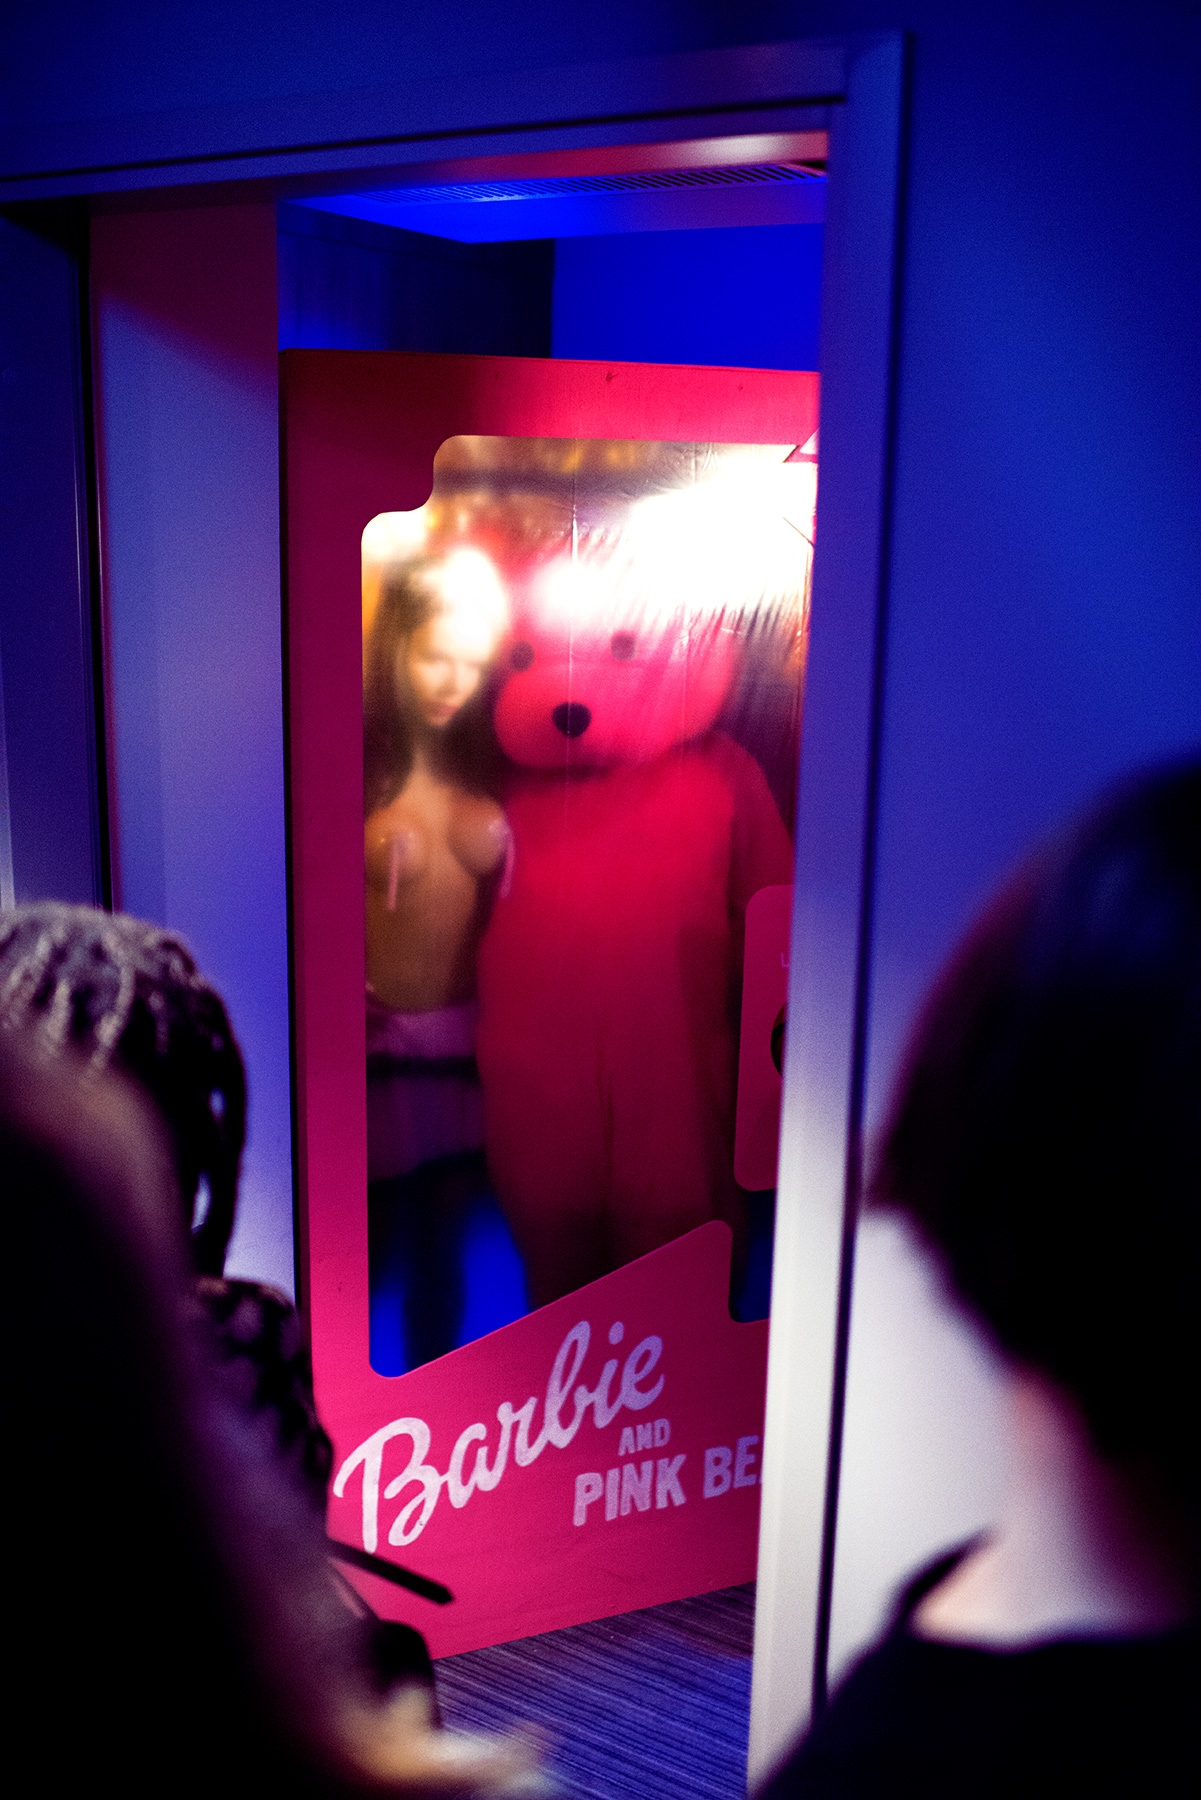 Barbie and The Pink Bear start the performance in human sized product packaging.